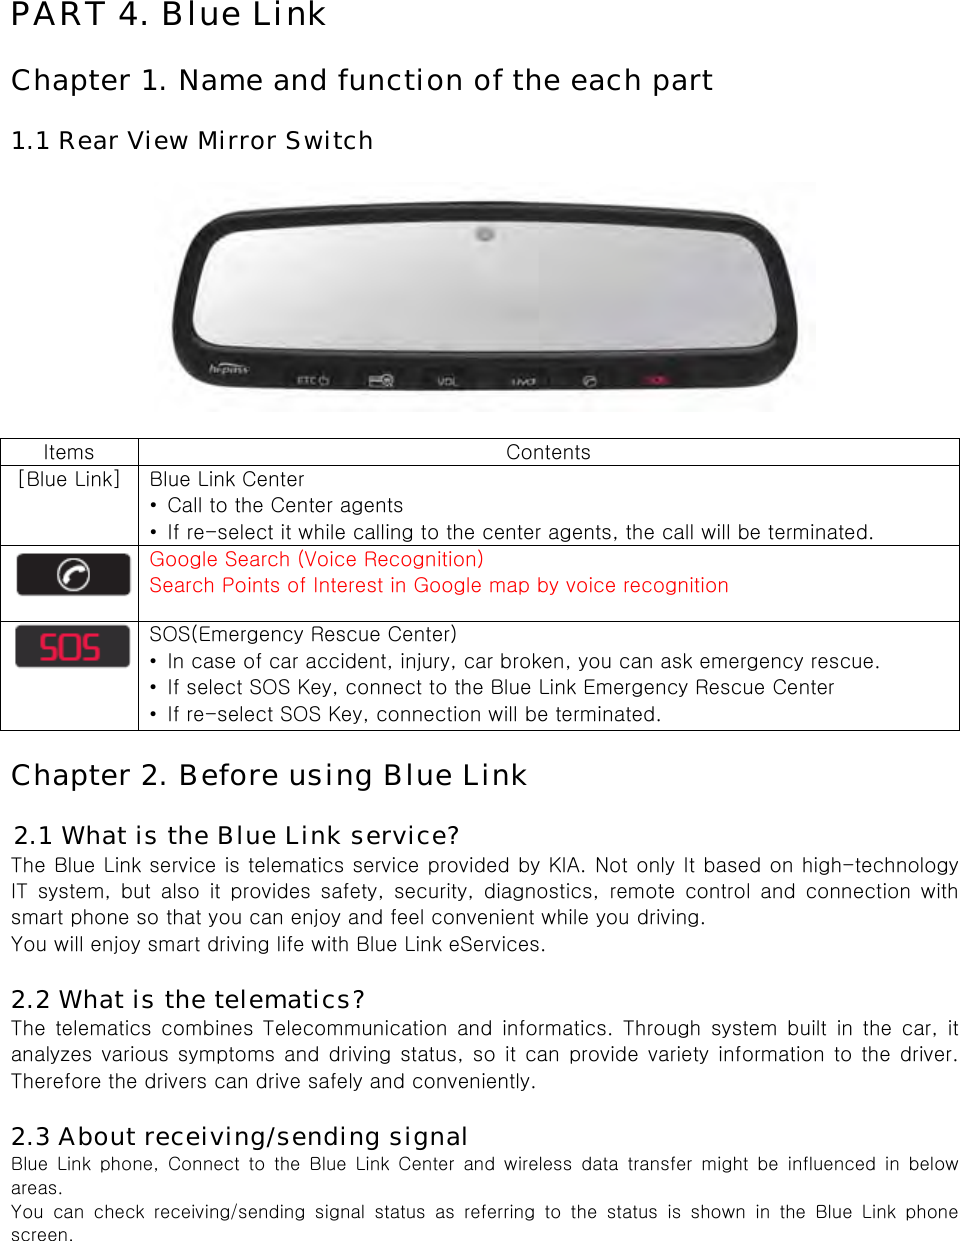  PART 4. Blue Link  Chapter 1. Name and function of the each part  1.1 Rear View Mirror Switch    Items  Contents [Blue Link]  Blue Link Center •  Call to the Center agents •  If re-select it while calling to the center agents, the call will be terminated.  Google Search (Voice Recognition) Search Points of Interest in Google map by voice recognition  SOS(Emergency Rescue Center) •  In case of car accident, injury, car broken, you can ask emergency rescue. •  If select SOS Key, connect to the Blue Link Emergency Rescue Center •  If re-select SOS Key, connection will be terminated.  Chapter 2. Before using Blue Link  2.1 What is the Blue Link service? The Blue Link service is telematics service provided by KIA. Not only It based on high-technology IT  system,  but  also  it  provides  safety,  security,  diagnostics,  remote control and connection with smart phone so that you can enjoy and feel convenient while you driving.   You will enjoy smart driving life with Blue Link eServices.  2.2 What is the telematics? The  telematics  combines  Telecommunication  and  informatics.  Through  system  built  in  the  car,  it analyzes various symptoms and driving status, so it can provide variety information to the driver. Therefore the drivers can drive safely and conveniently.  2.3 About receiving/sending signal Blue Link phone, Connect to the Blue Link Center and wireless data  transfer  might  be  influenced  in  below areas. You  can  check  receiving/sending  signal  status  as  referring  to  the  status  is  shown  in  the  Blue  Link  phone screen. 